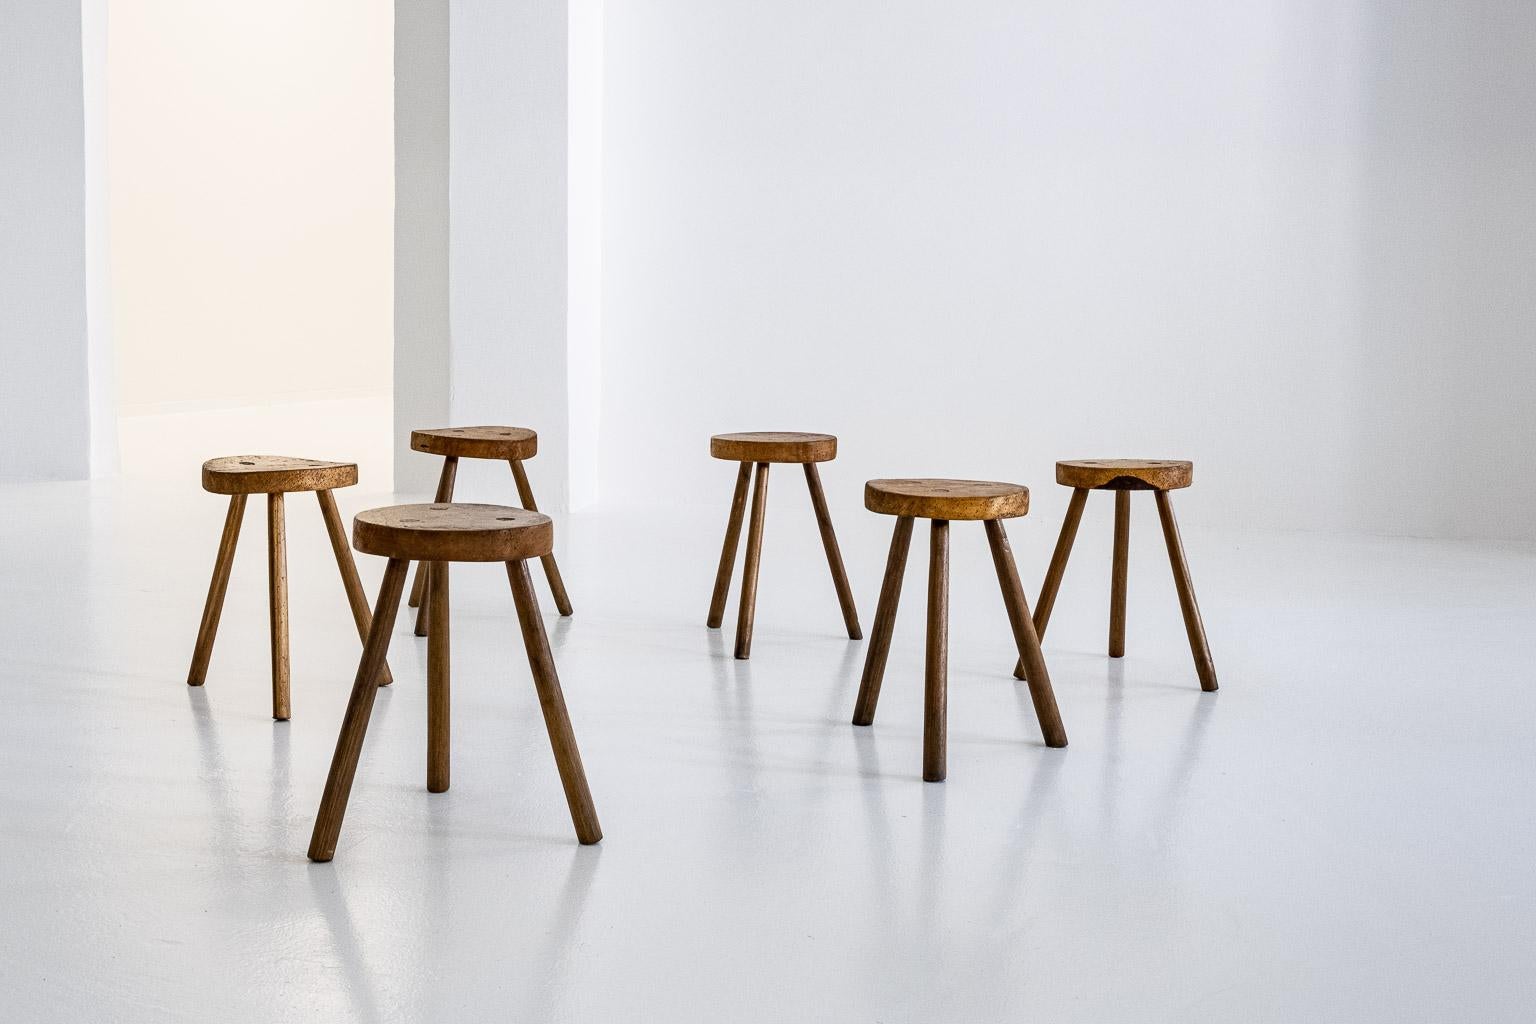 Italian Set of 6, Wooden, Brutalist Tripod Stools or Side Tables, Italy, ca. 1960s For Sale